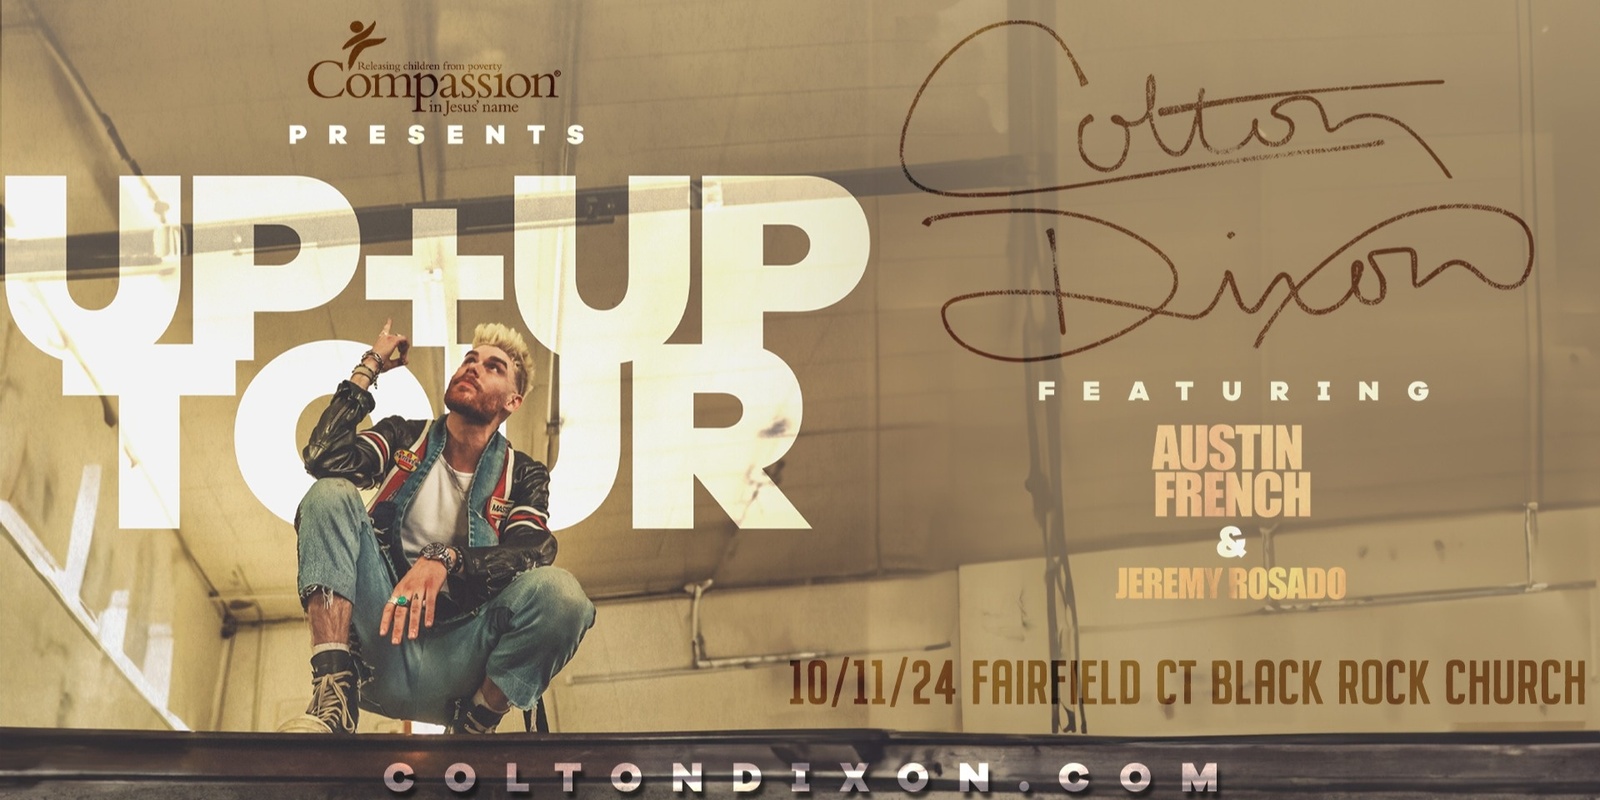 Banner image for Colton Dixon's Up & Up Tour featuring Austin French & Jeremy Rosado-Black Rock Church